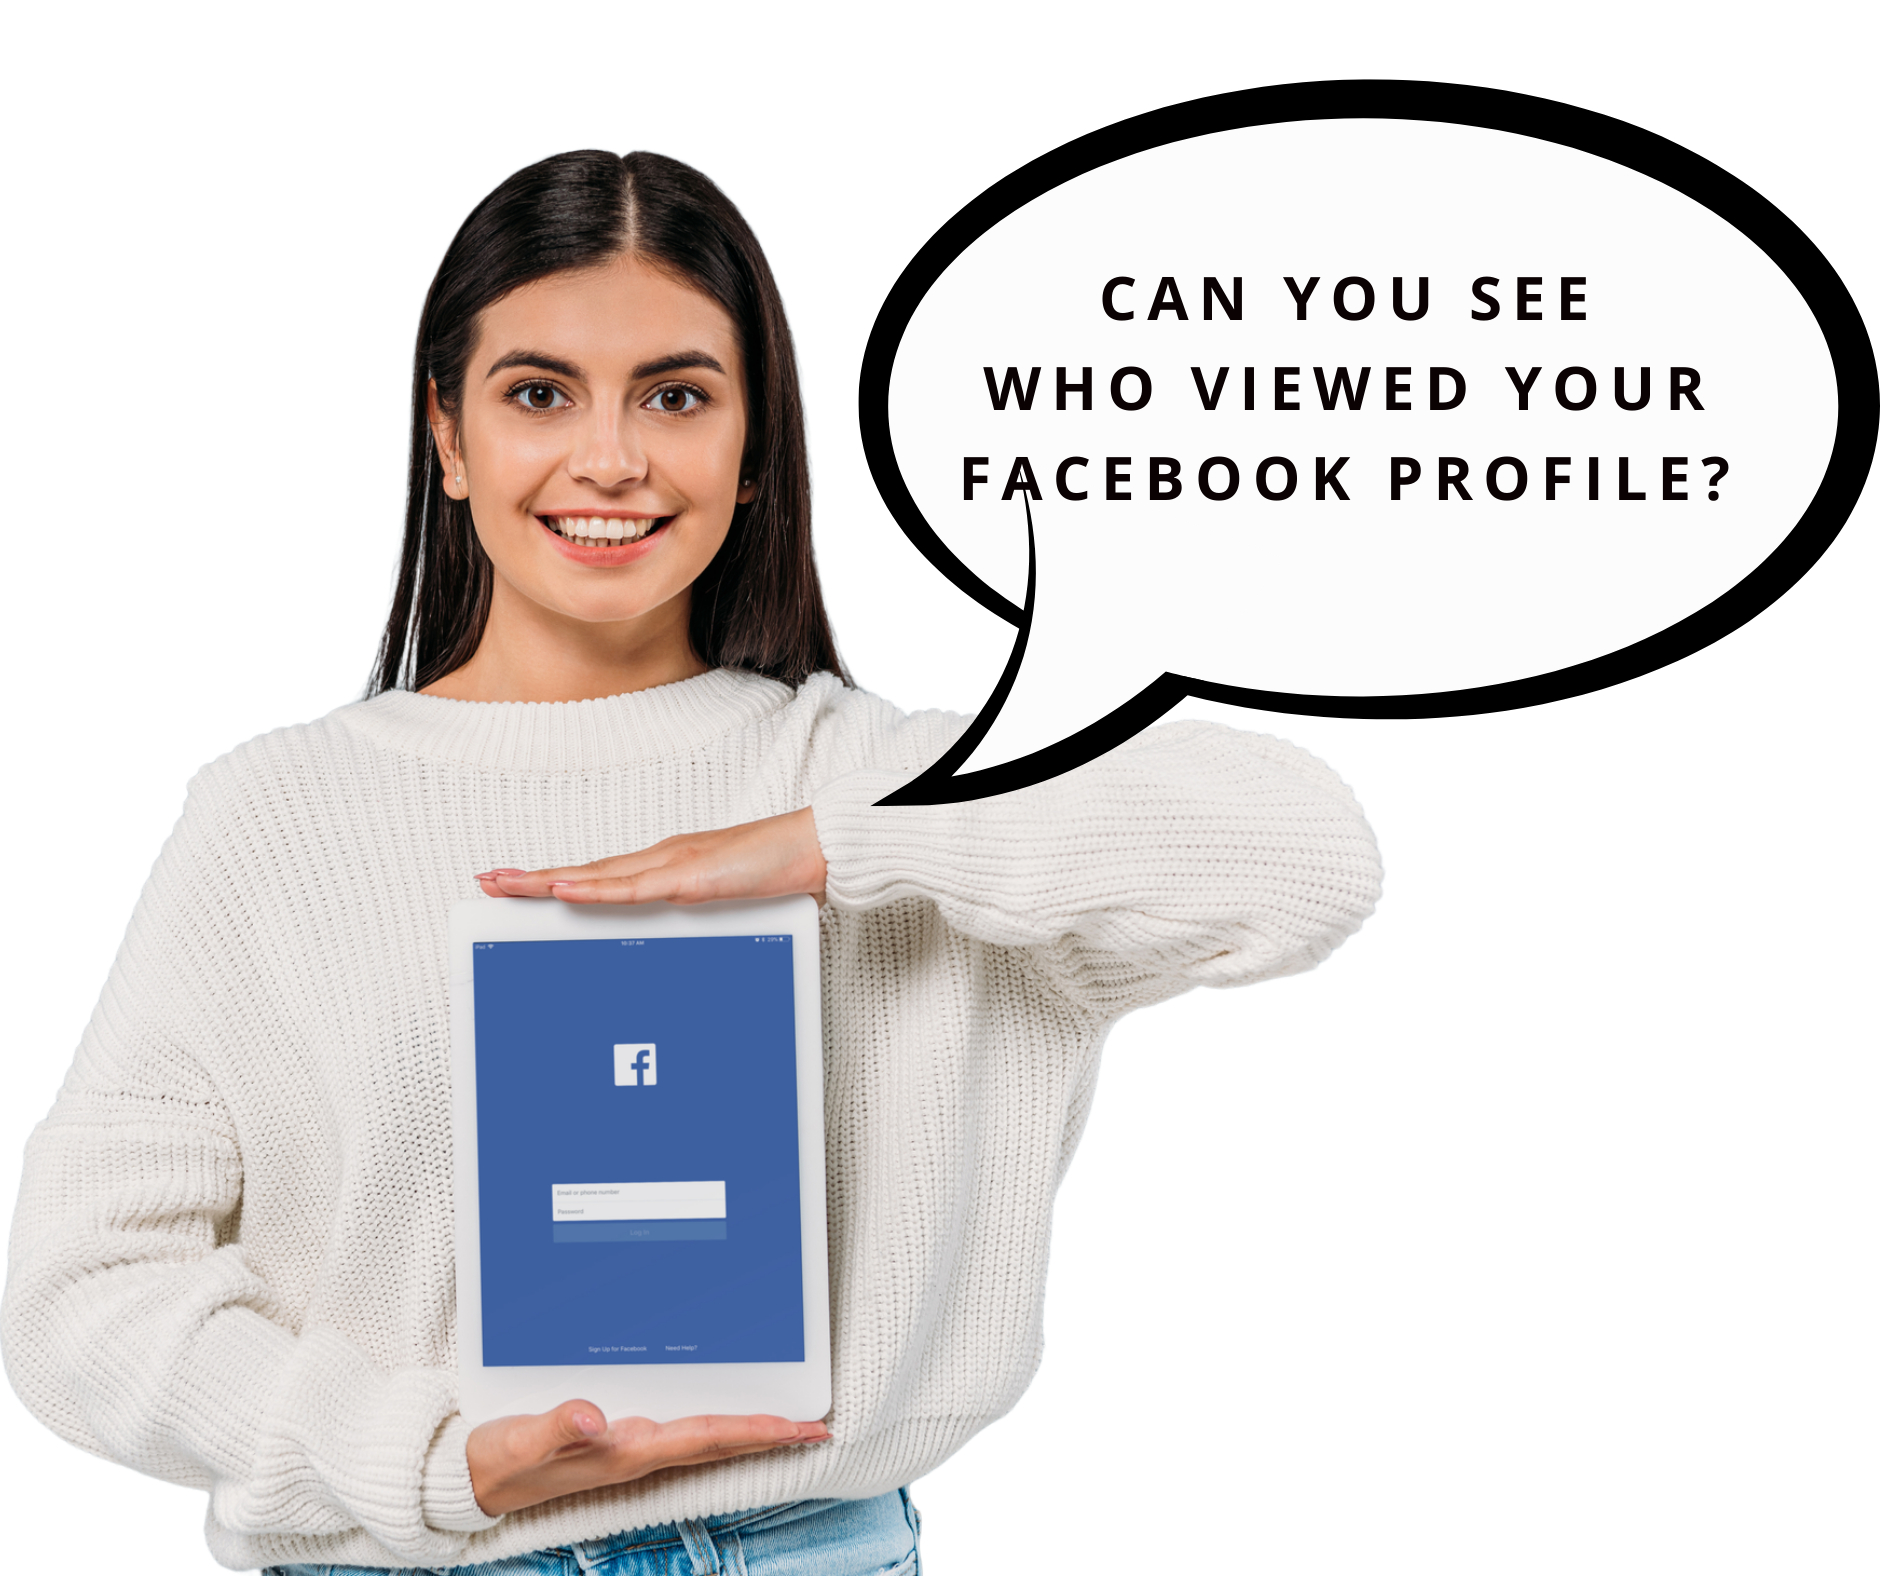 Can You See Who Viewed Your Facebook Profile